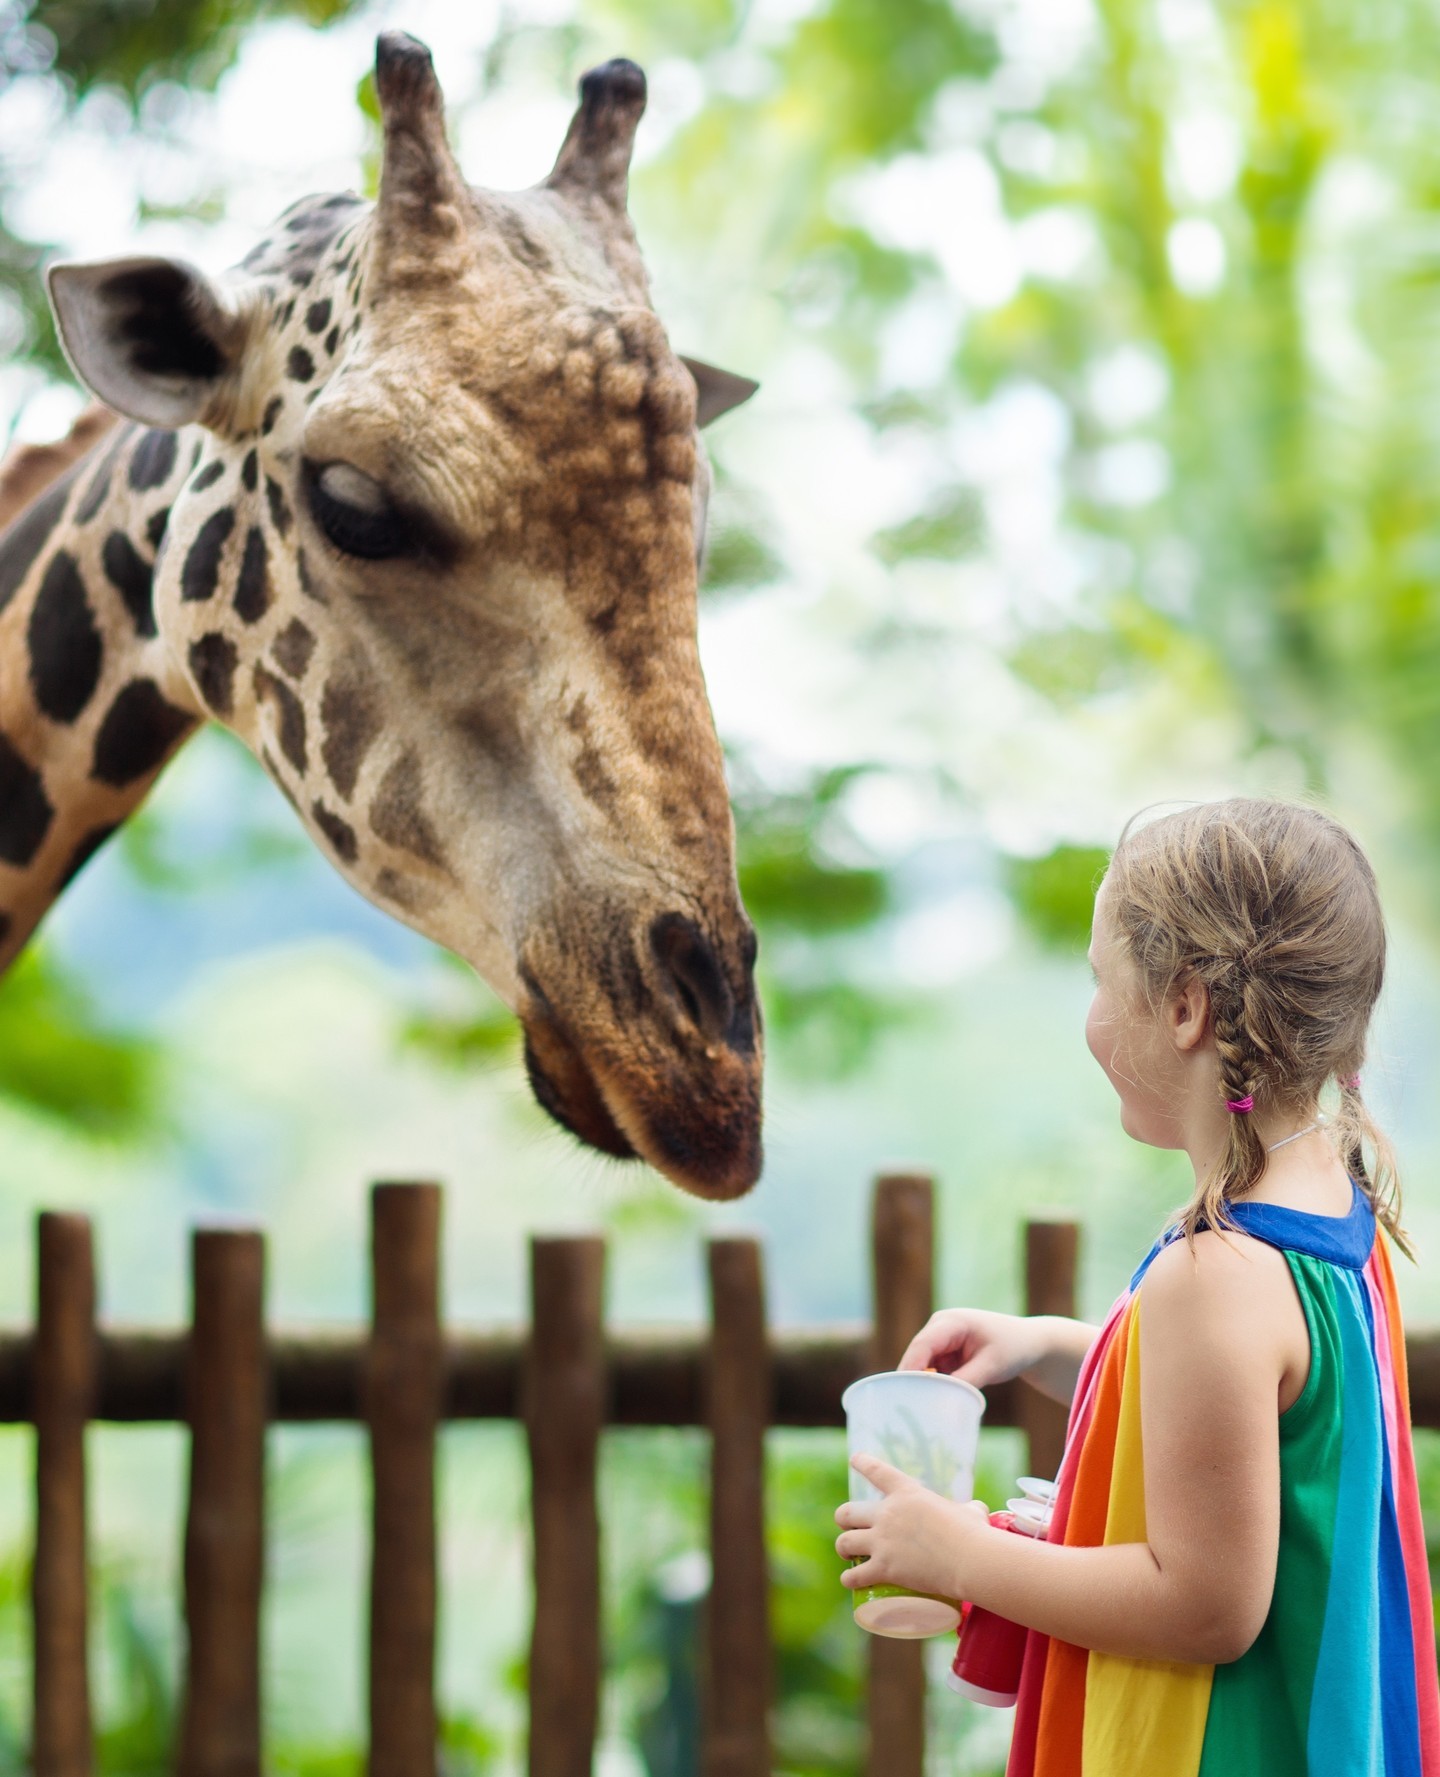 Top 5 Places to See Animals in Nevada 🦒 From feeding exotic sharks and swimming with dolphins to enjoying a relaxing day with loved ones at the local zoo, we have the top five spots to see animals in Nevada on FabulousNevada.com. ⁠
⁠